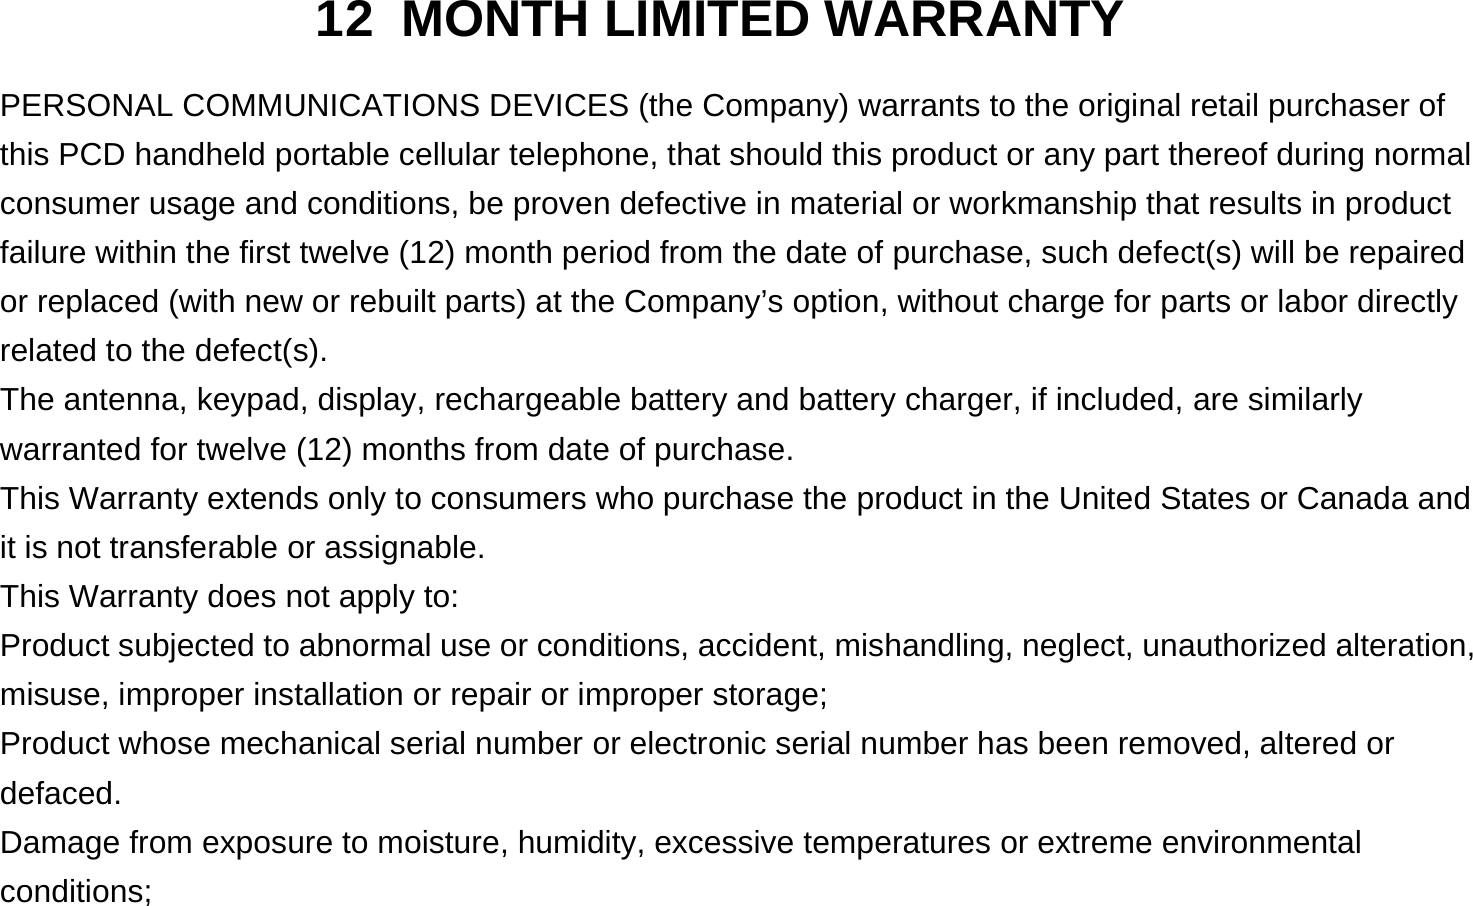  12 MONTH LIMITED WARRANTY PERSONAL COMMUNICATIONS DEVICES (the Company) warrants to the original retail purchaser of this PCD handheld portable cellular telephone, that should this product or any part thereof during normal consumer usage and conditions, be proven defective in material or workmanship that results in product failure within the first twelve (12) month period from the date of purchase, such defect(s) will be repaired or replaced (with new or rebuilt parts) at the Company’s option, without charge for parts or labor directly related to the defect(s). The antenna, keypad, display, rechargeable battery and battery charger, if included, are similarly warranted for twelve (12) months from date of purchase.     This Warranty extends only to consumers who purchase the product in the United States or Canada and it is not transferable or assignable. This Warranty does not apply to: Product subjected to abnormal use or conditions, accident, mishandling, neglect, unauthorized alteration, misuse, improper installation or repair or improper storage; Product whose mechanical serial number or electronic serial number has been removed, altered or defaced. Damage from exposure to moisture, humidity, excessive temperatures or extreme environmental conditions; 